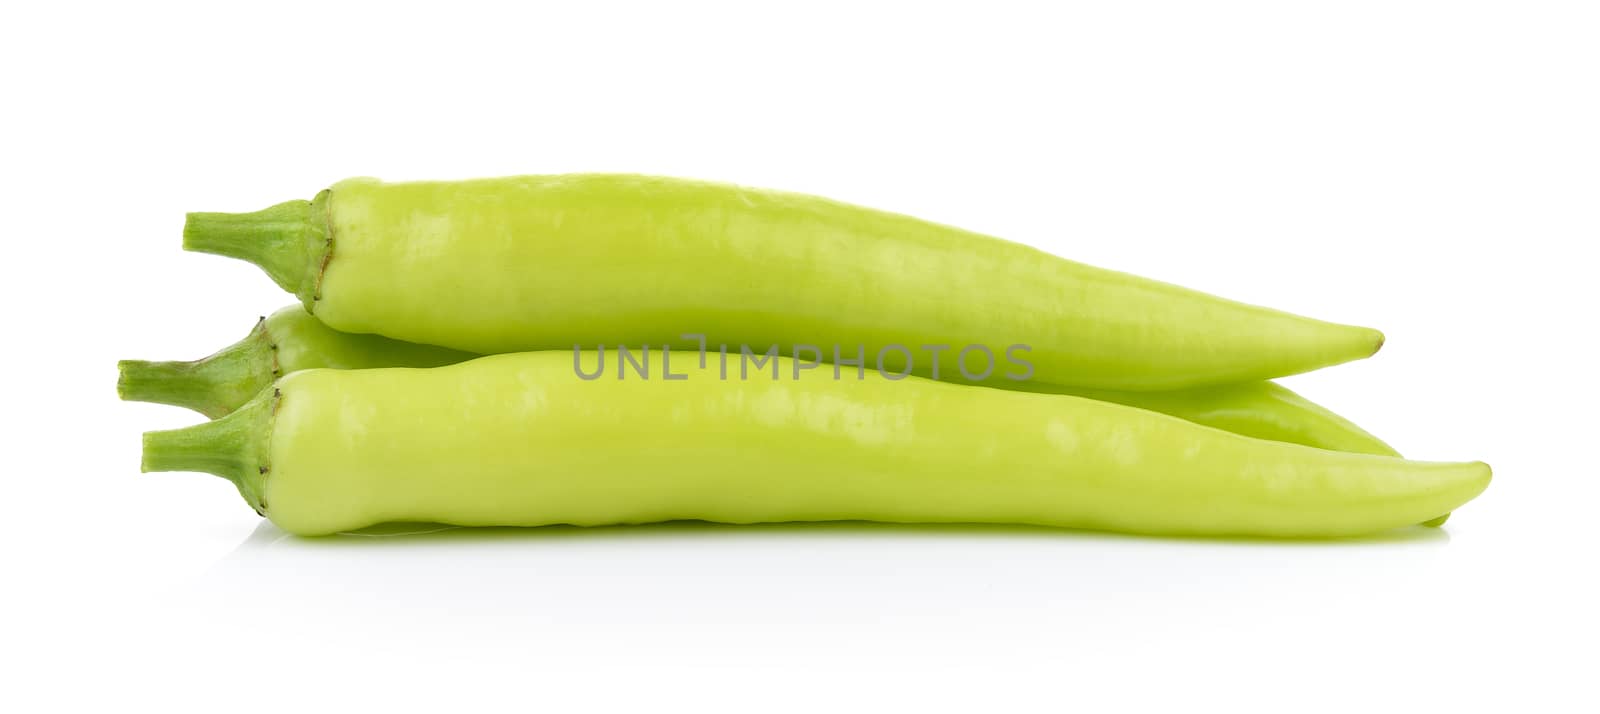 green chili pepper on white background by sommai